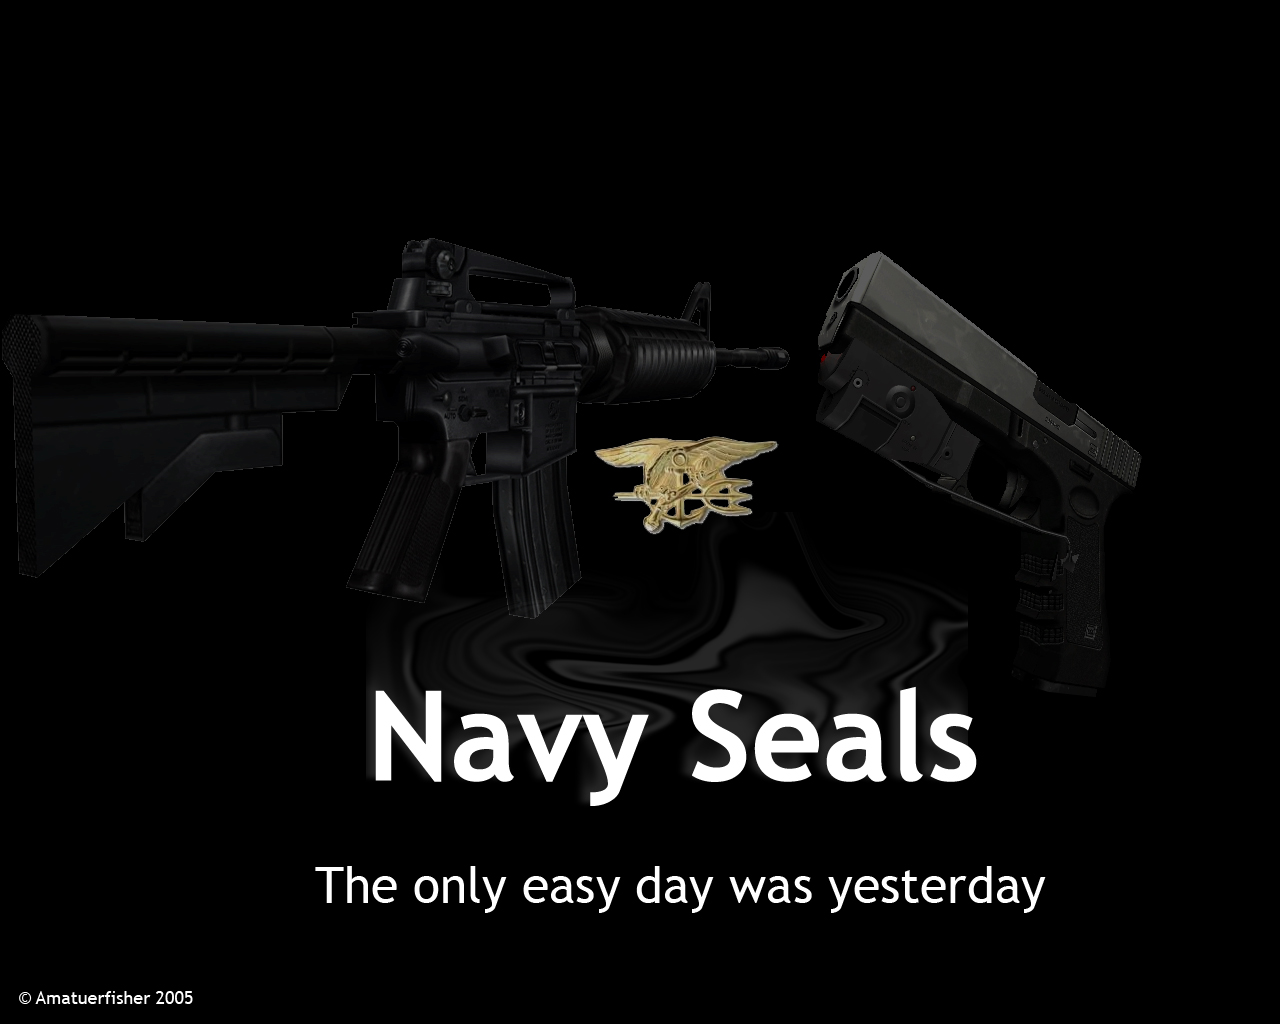 Navy Seals by amatuerfisher on